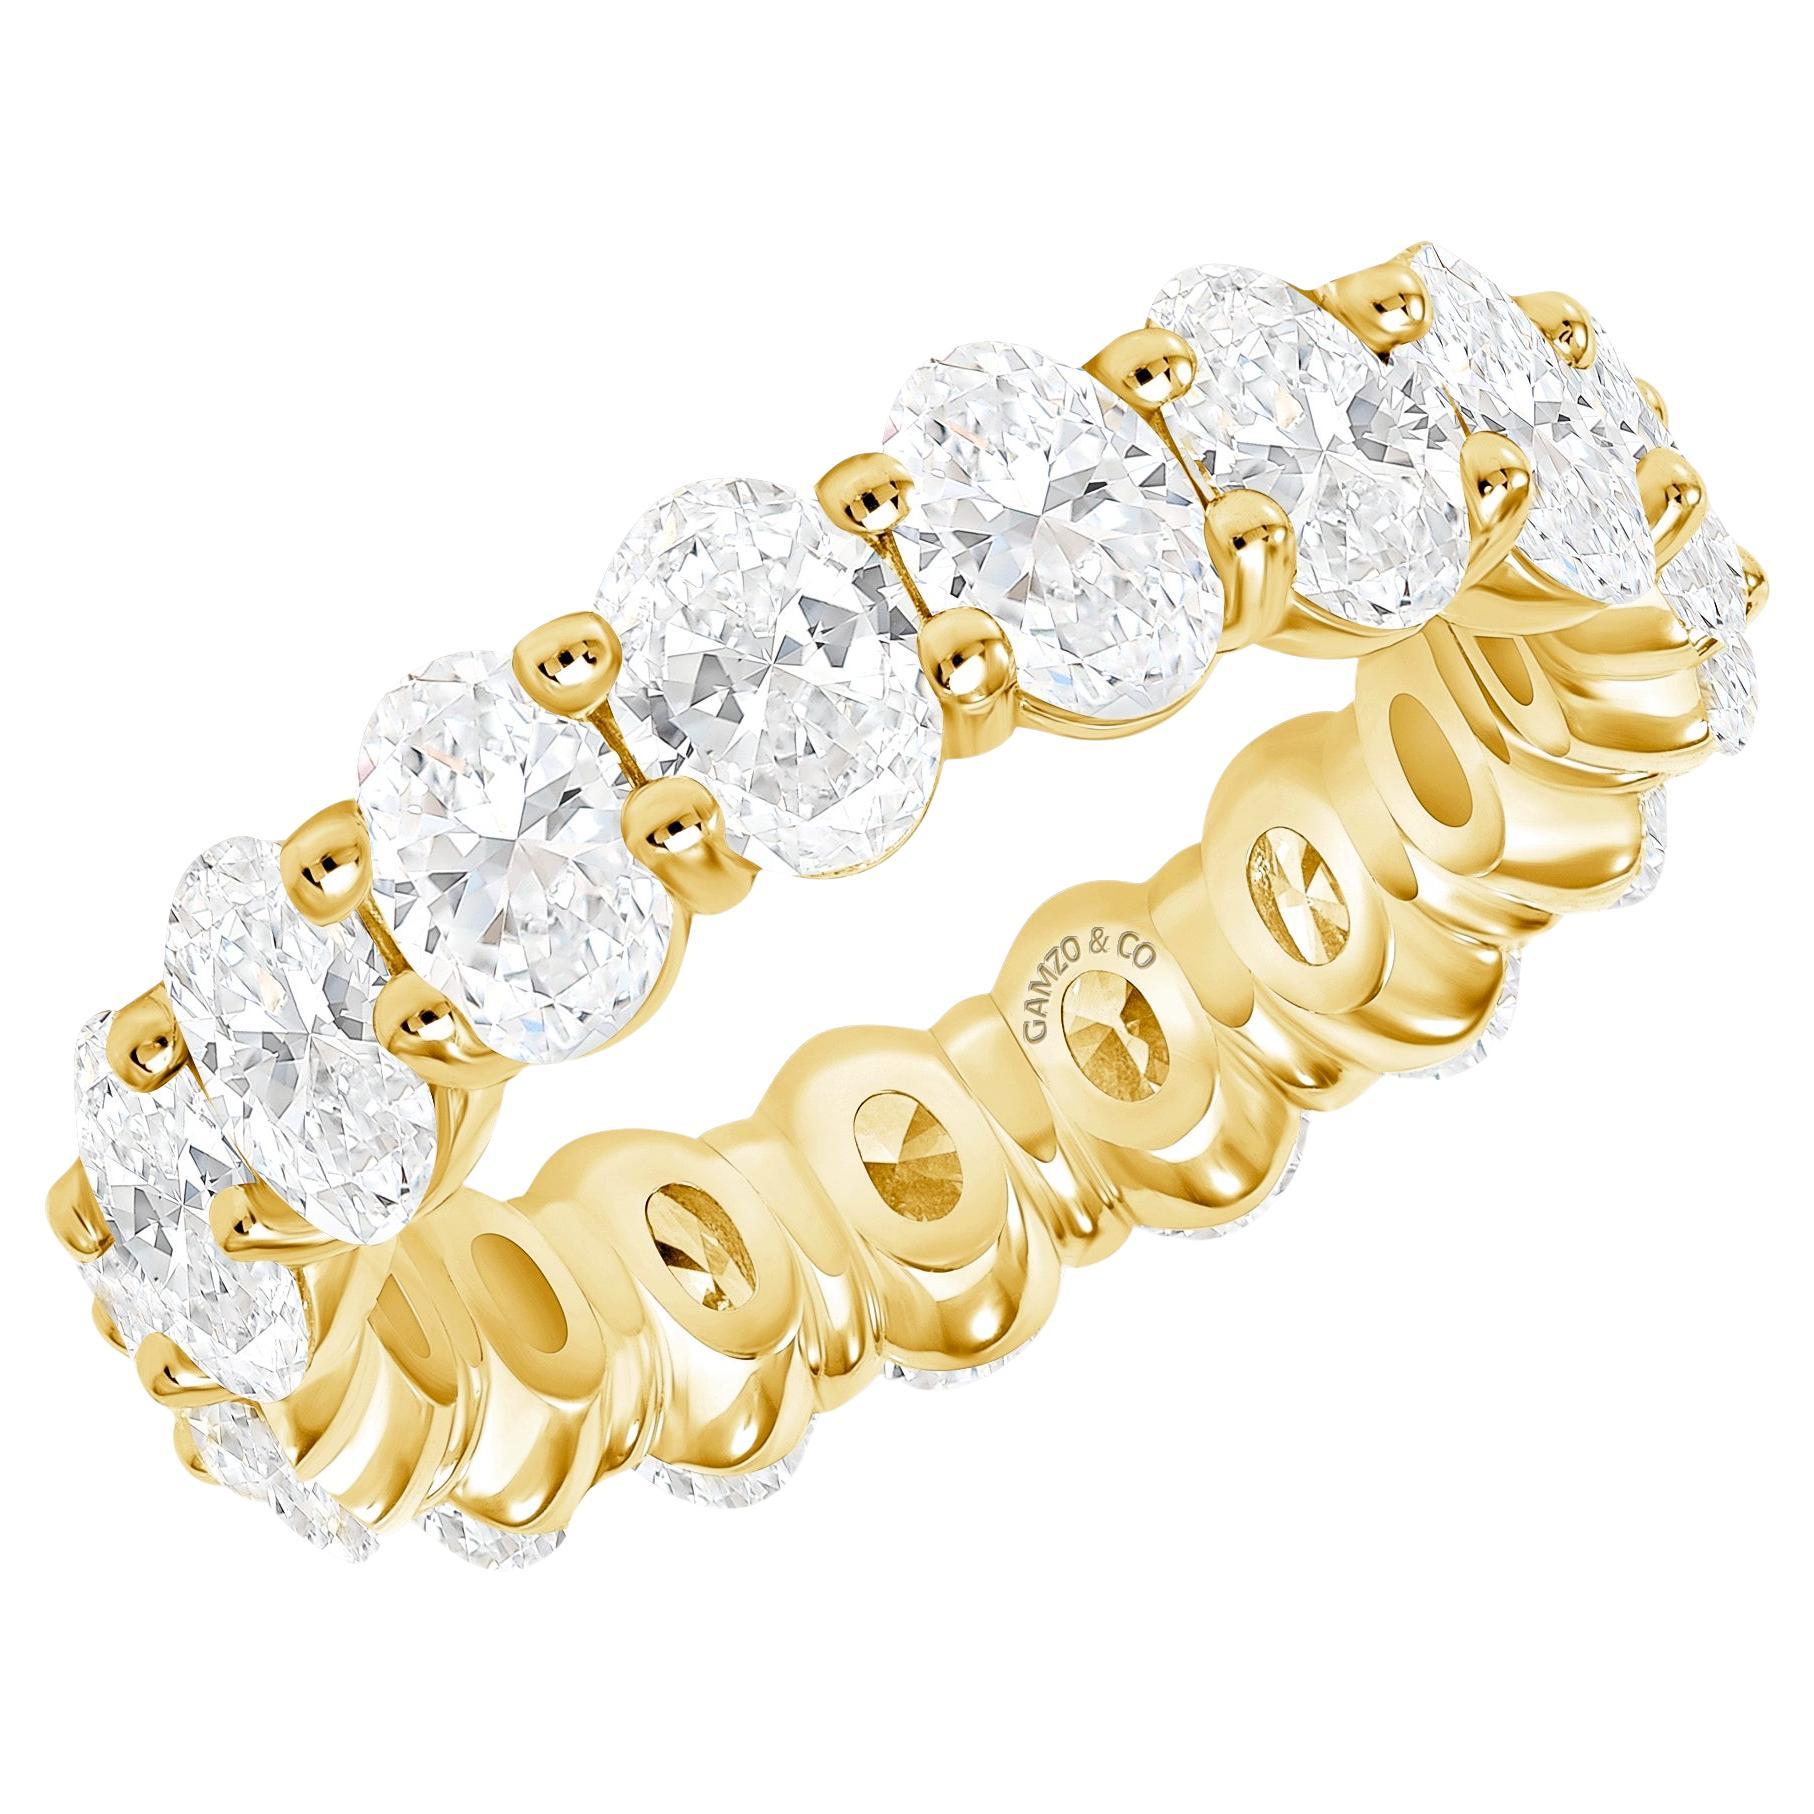 For Sale:  18k Yellow Gold 6 Carat Oval Cut Natural Diamond Eternity Ring